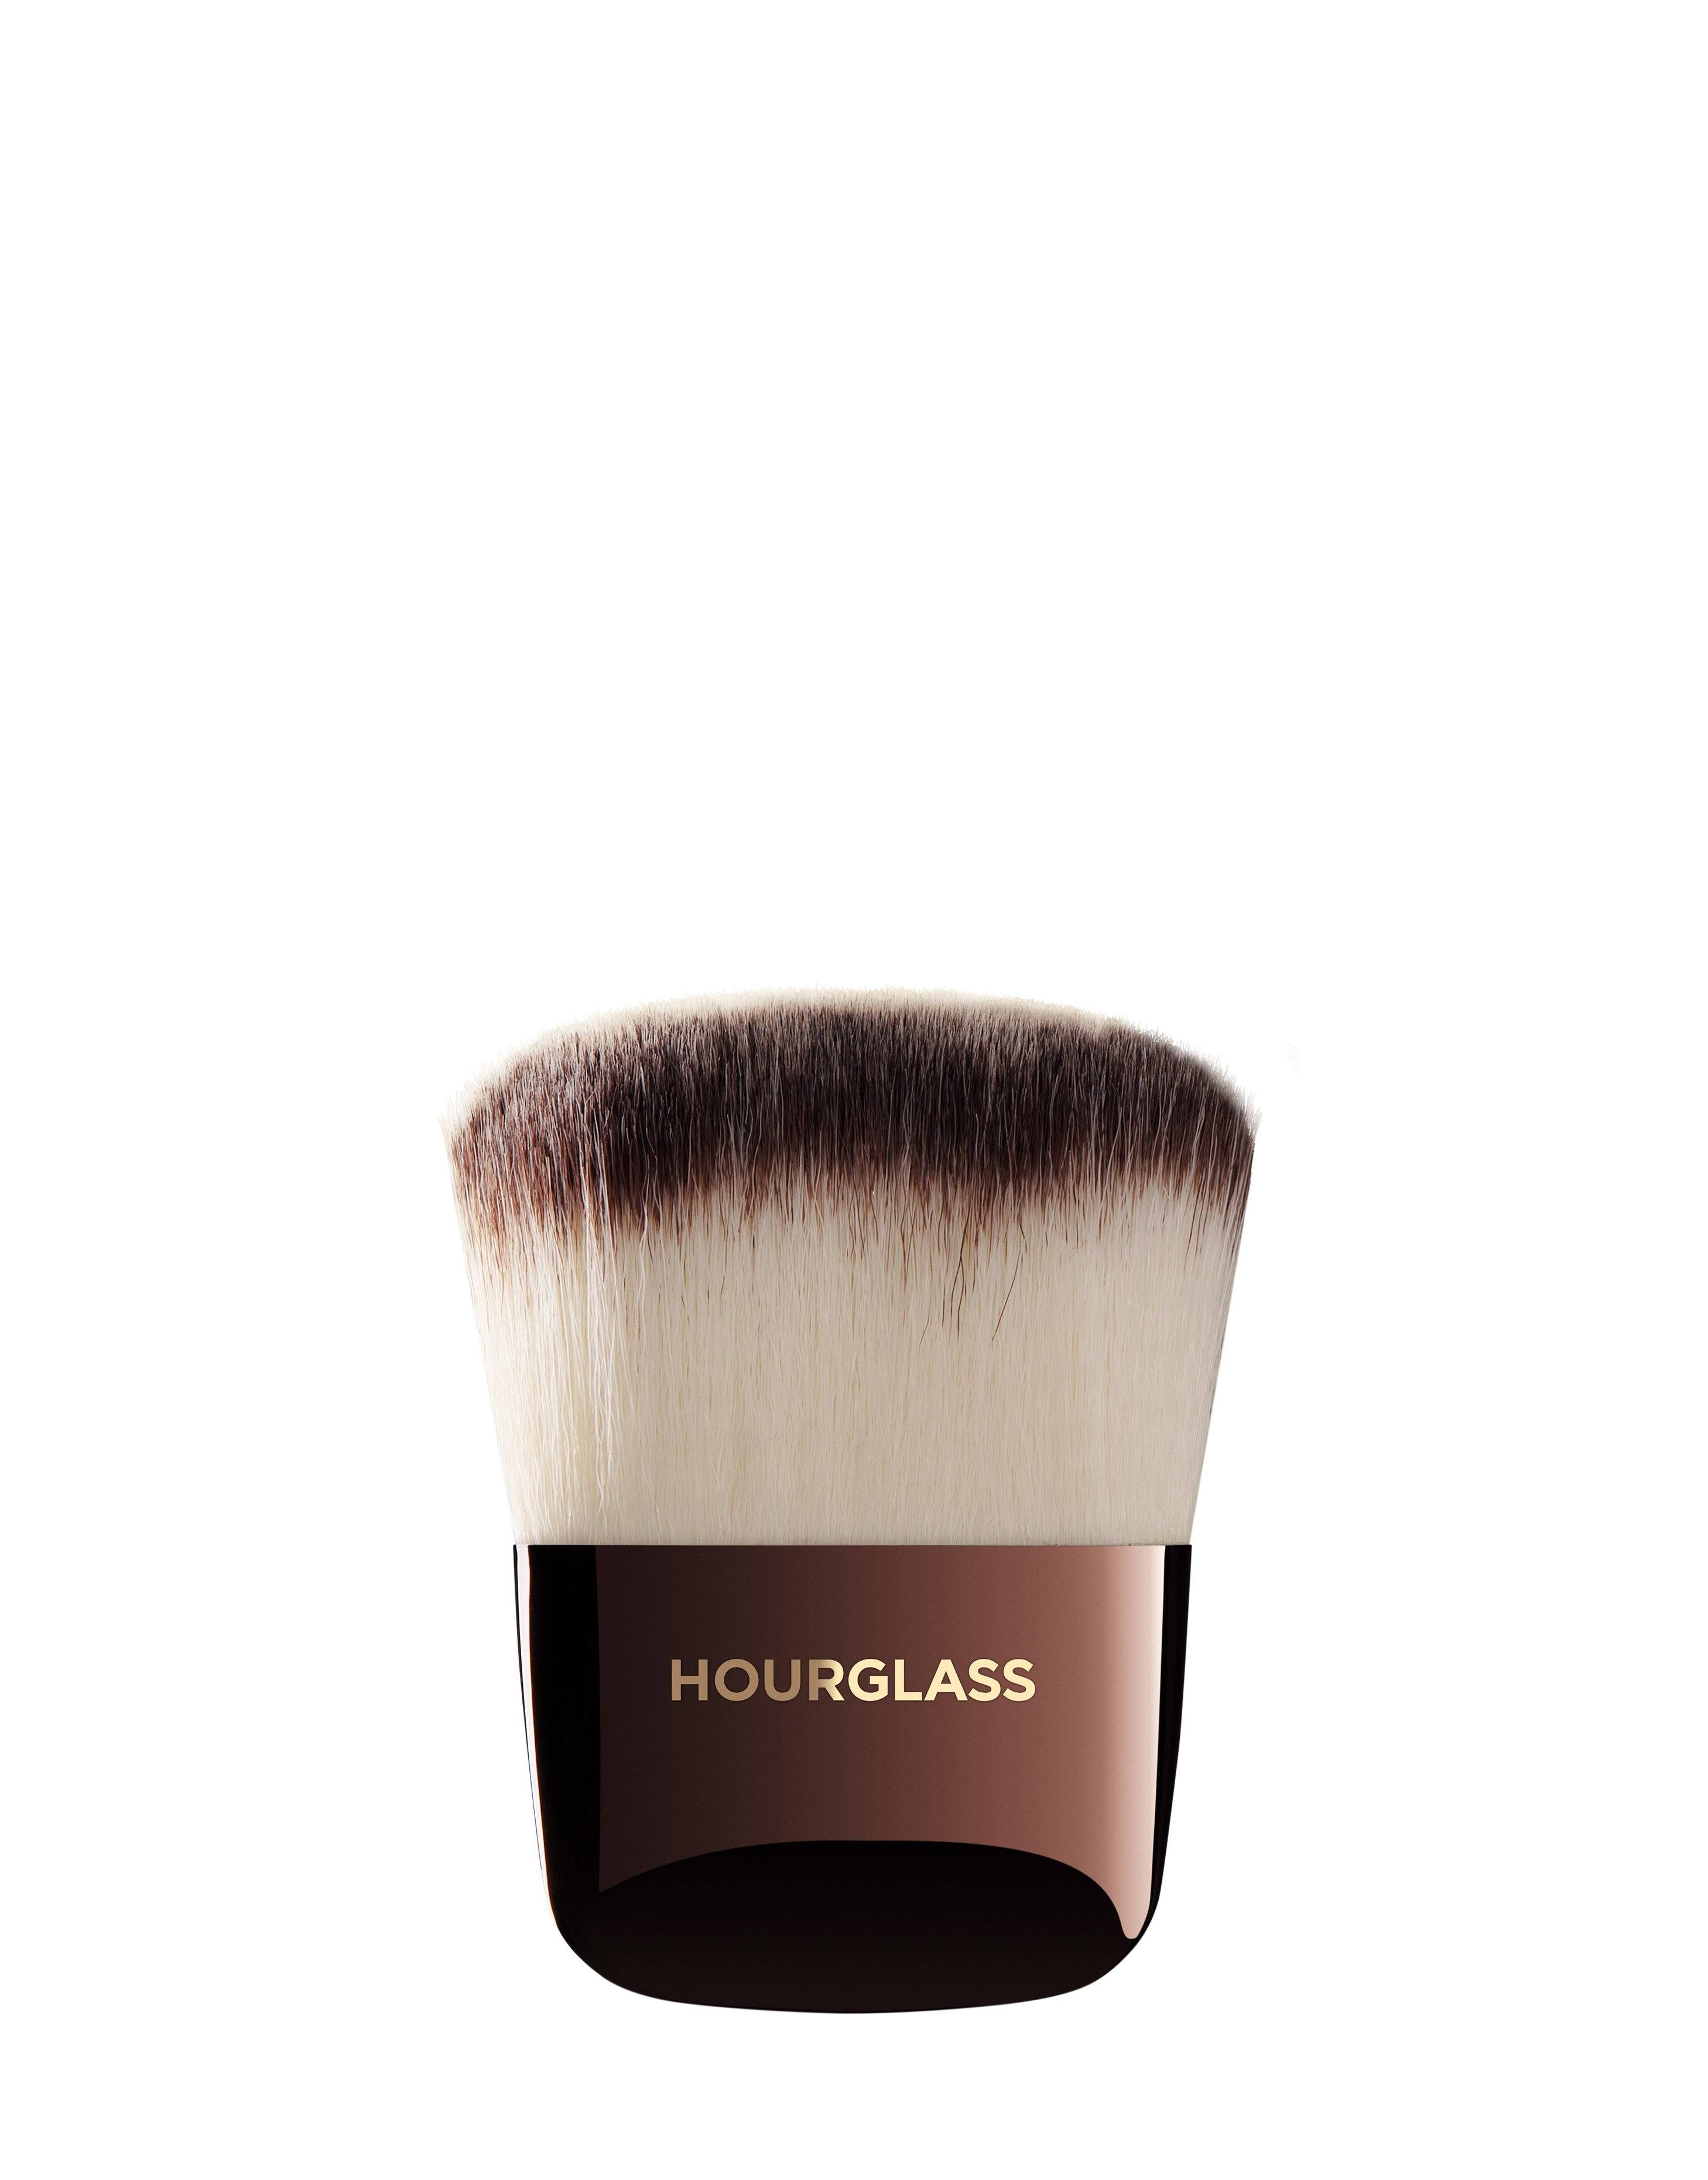 Chanel foundation Brush Travel Size (old version) **pick your